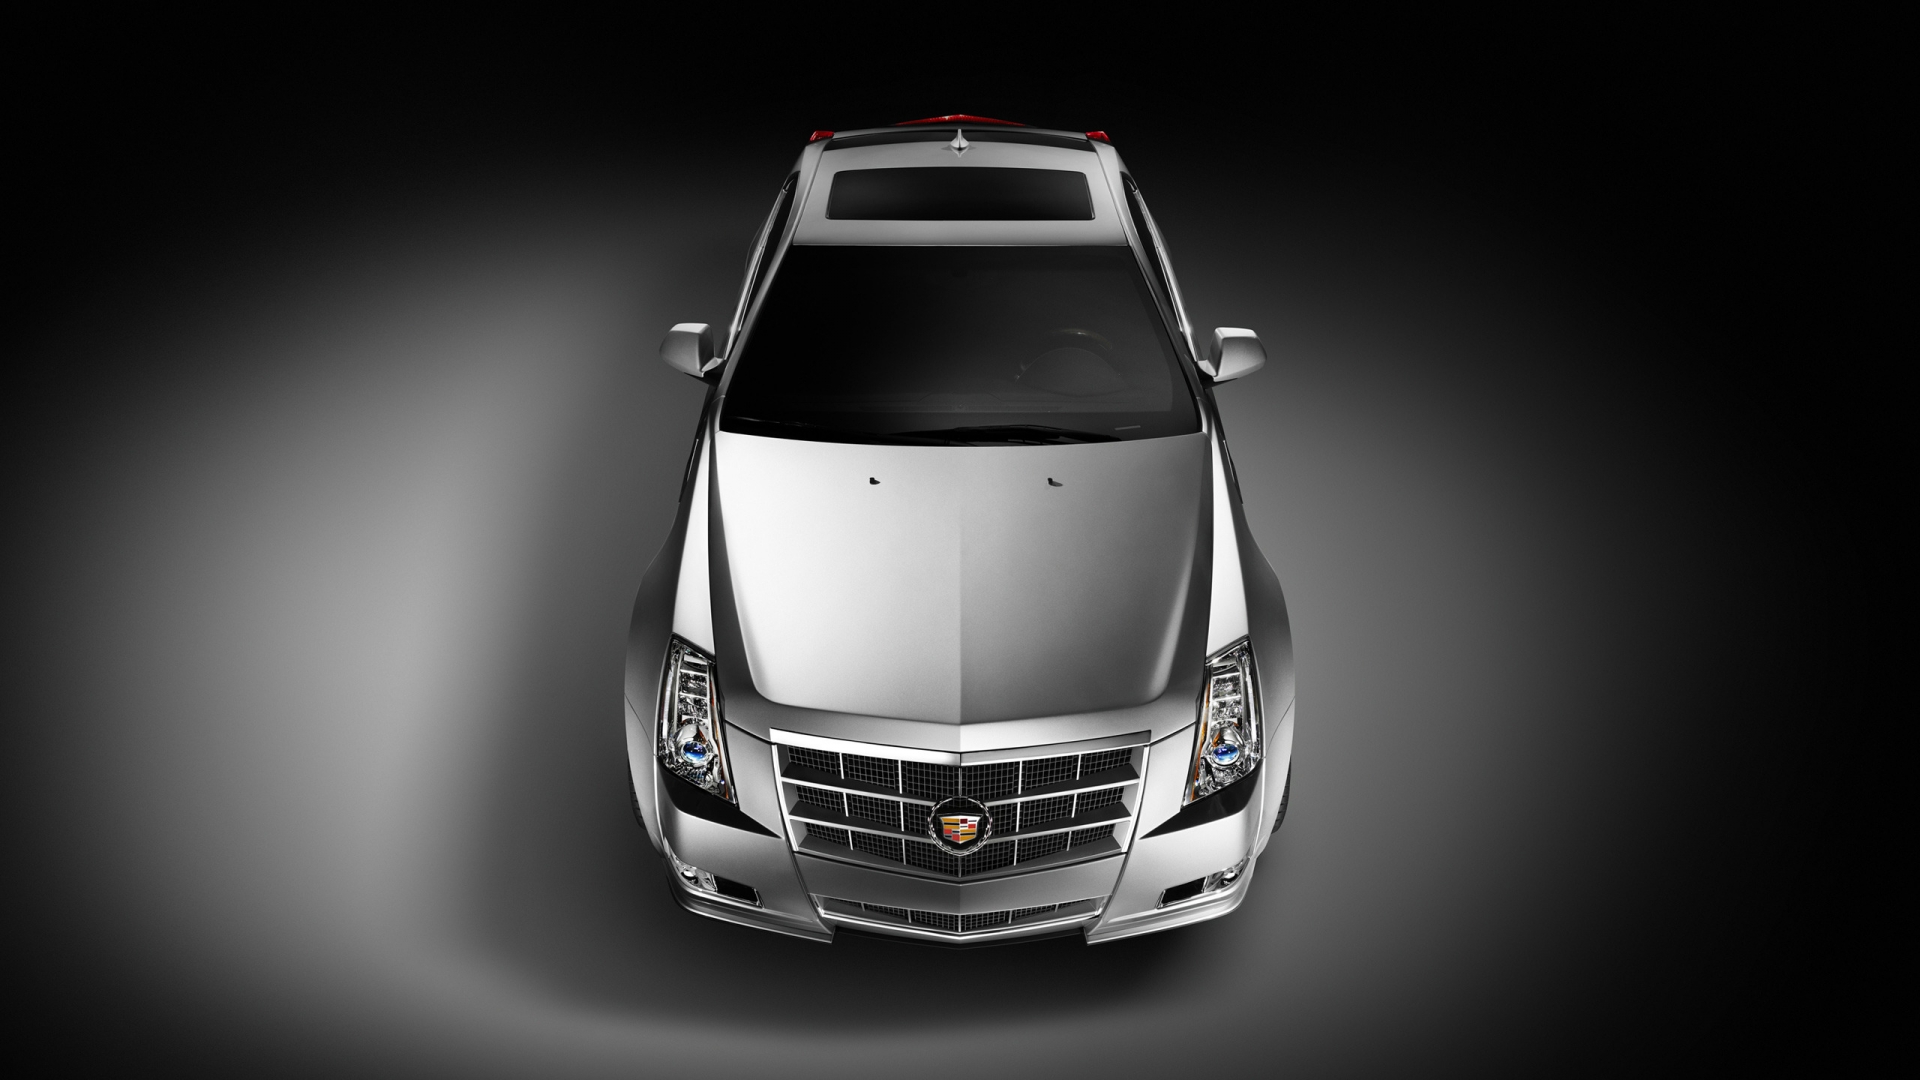 Cadillac CTS Coupe for 1920 x 1080 HDTV 1080p resolution